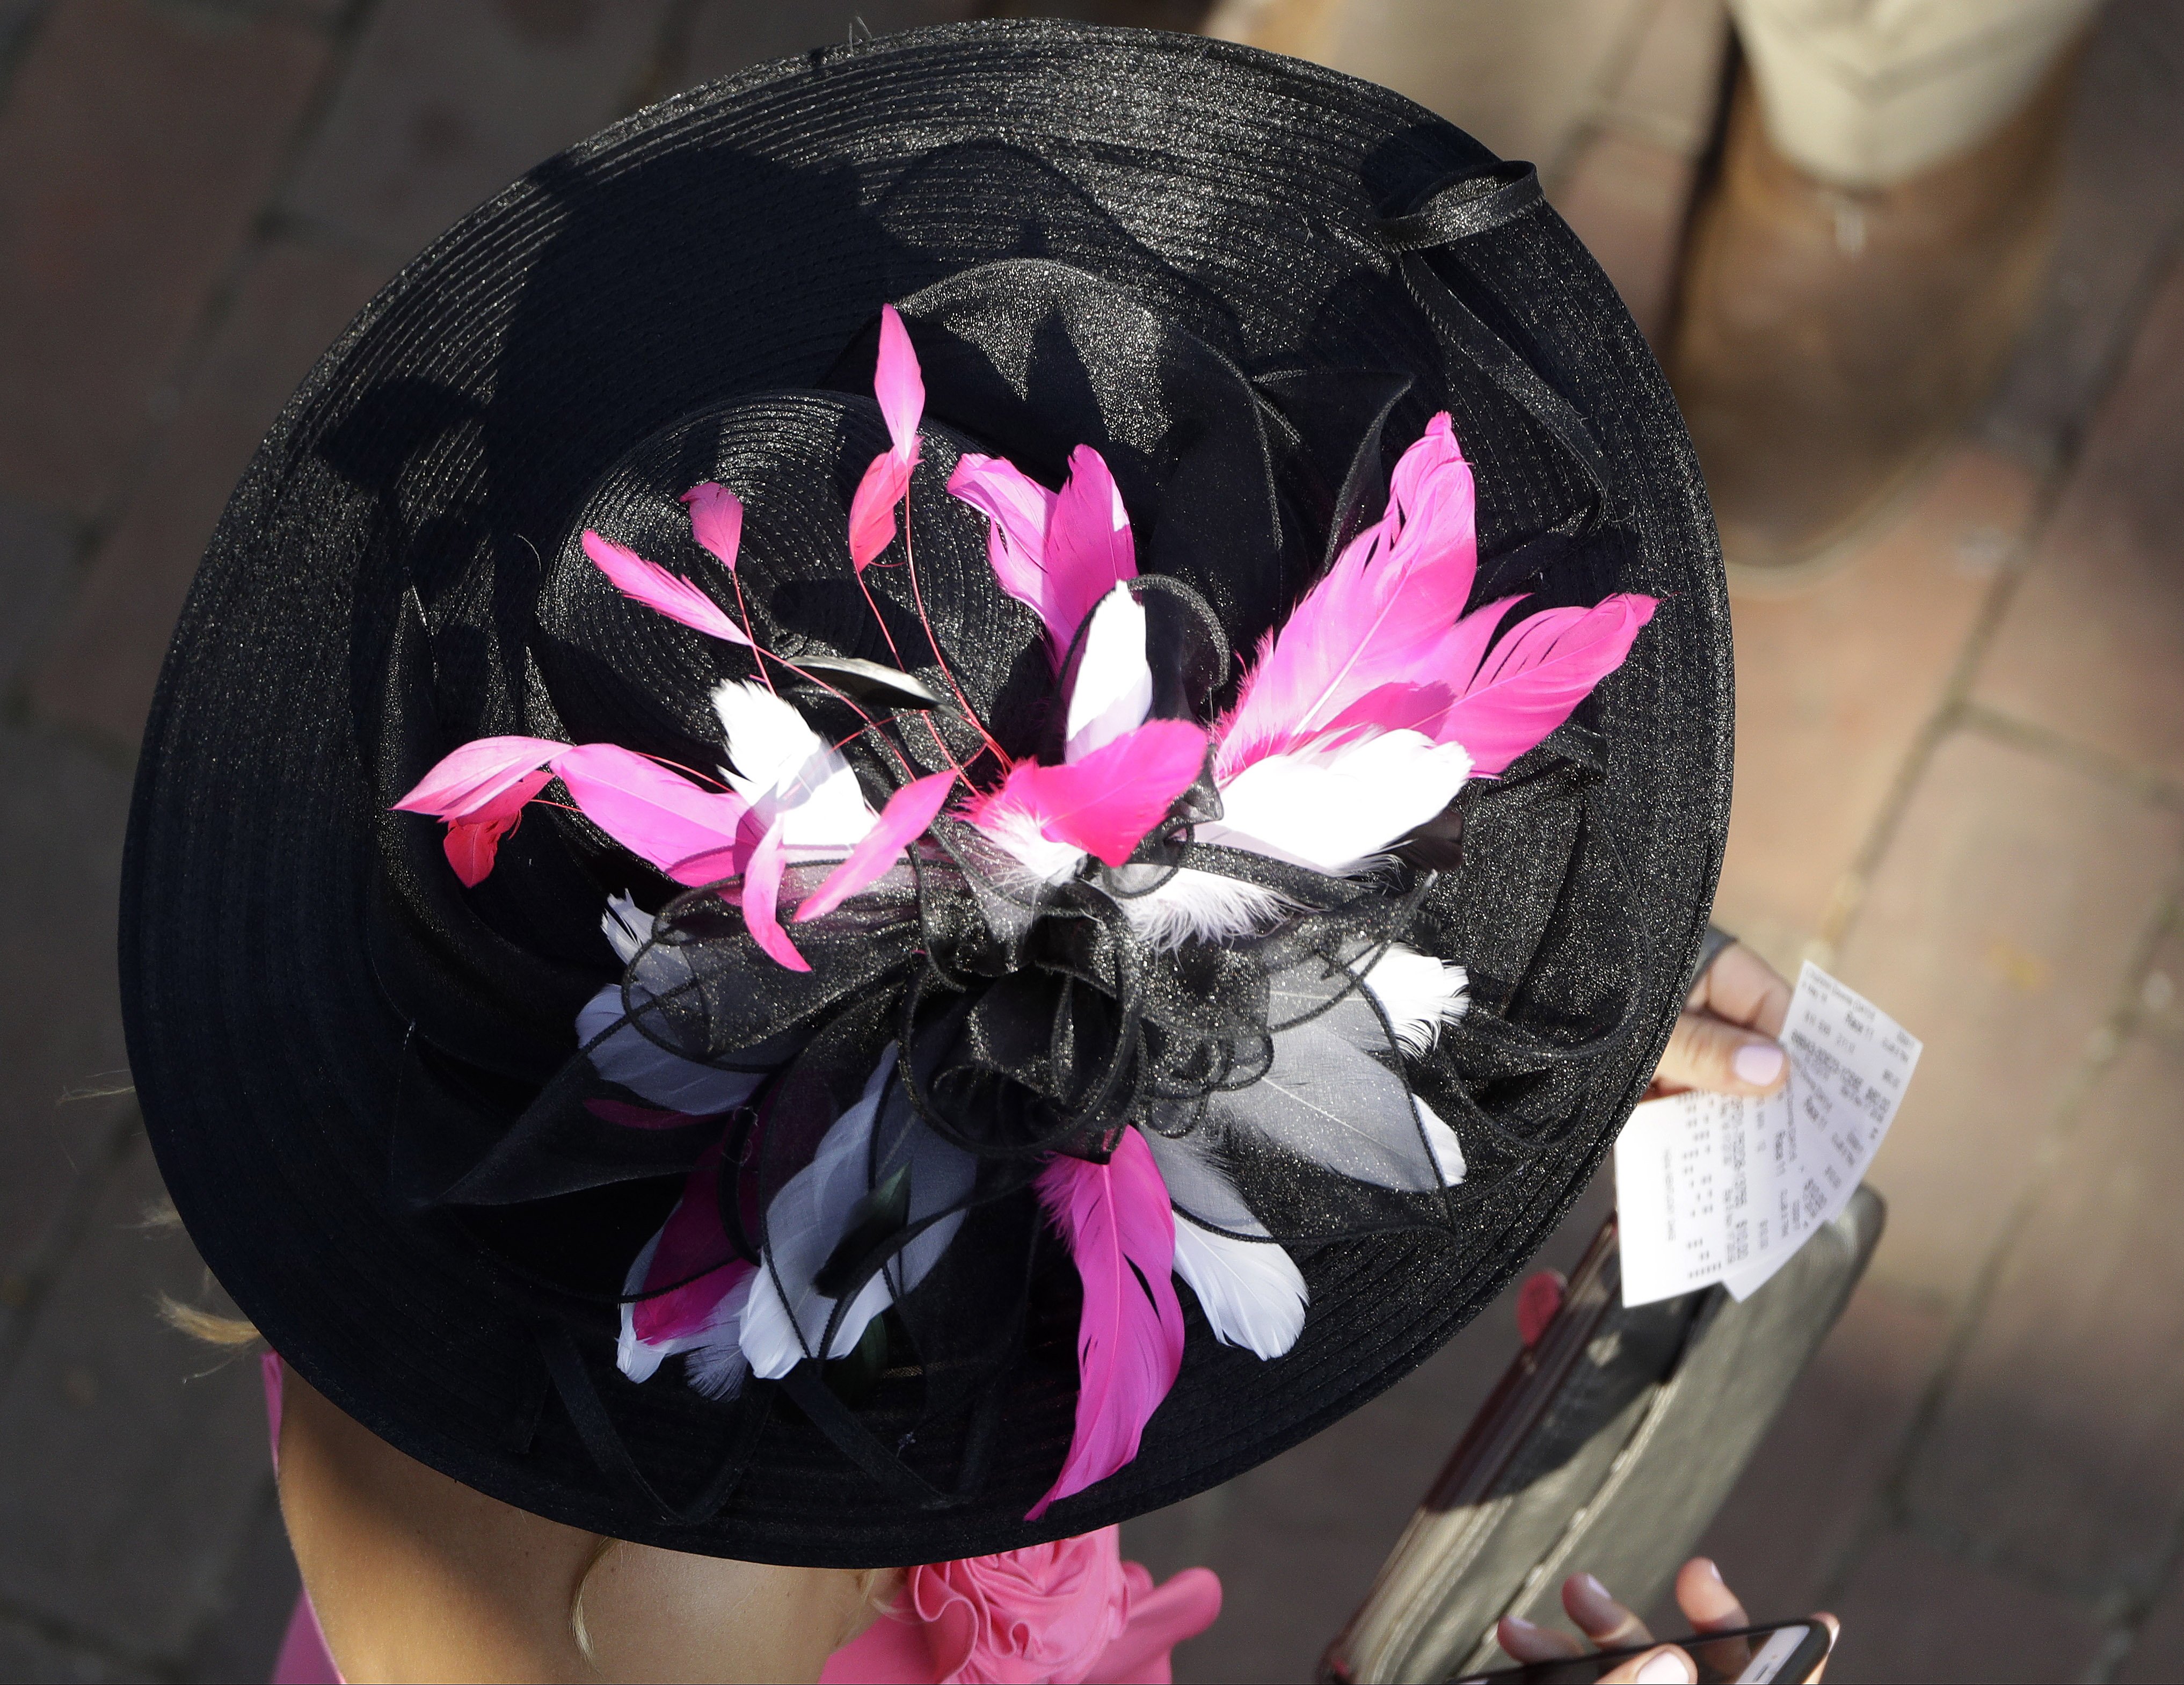 Woman with a hat during the 142nd running of the Kentucky Oaks horse race at Churchill Downs on May 7, 2016, in Louisville, Ky.